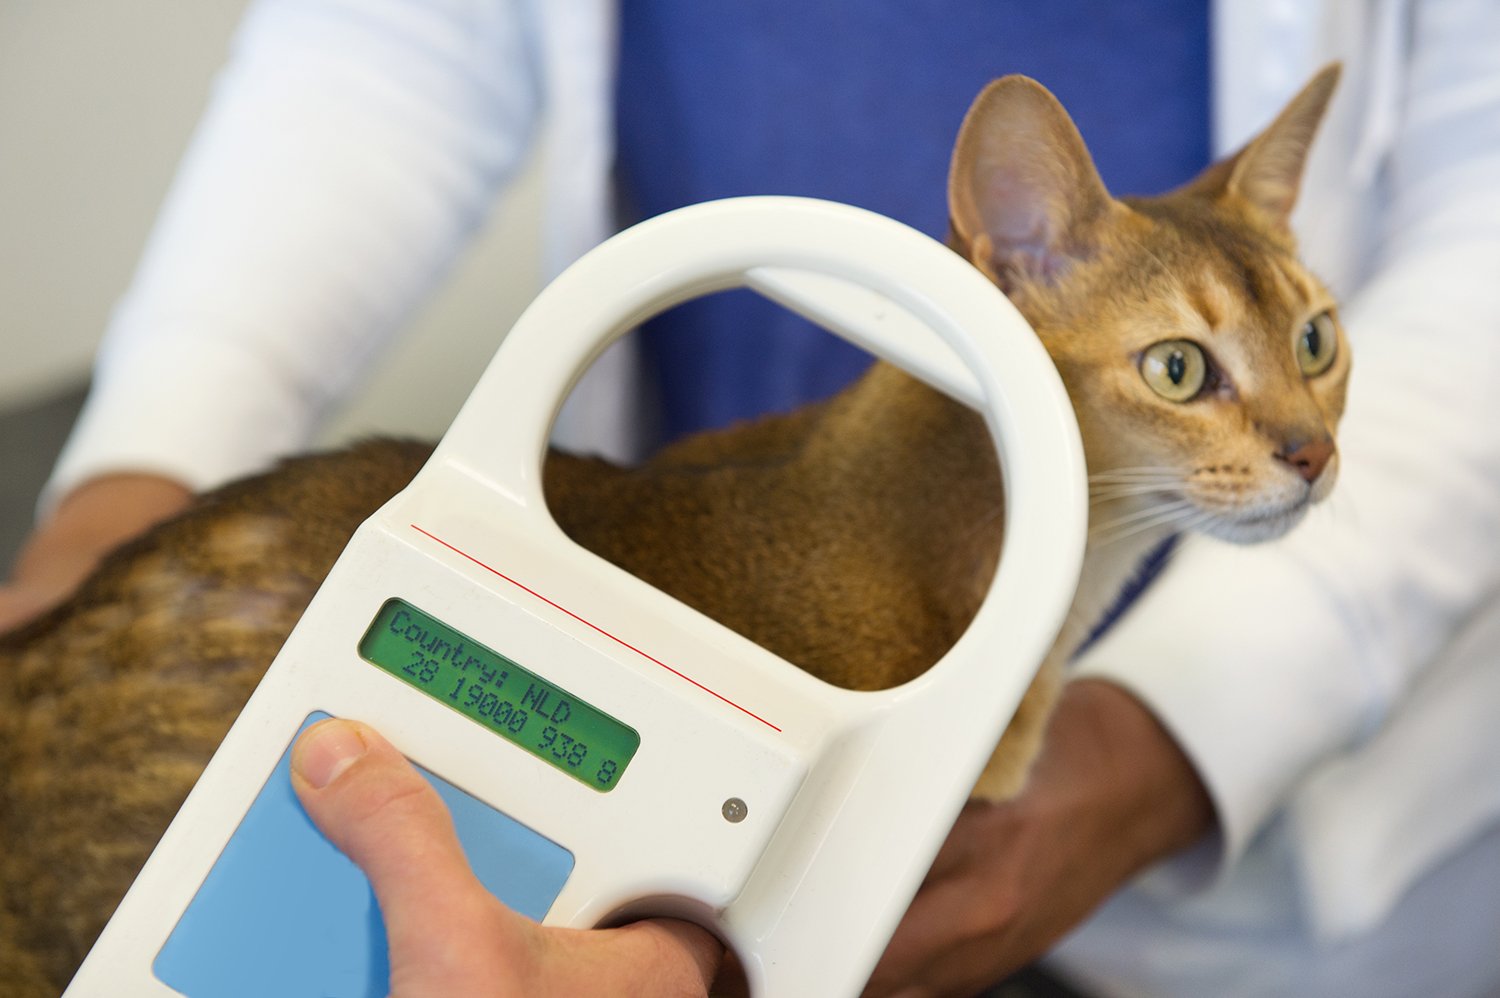 Cat with Microchip